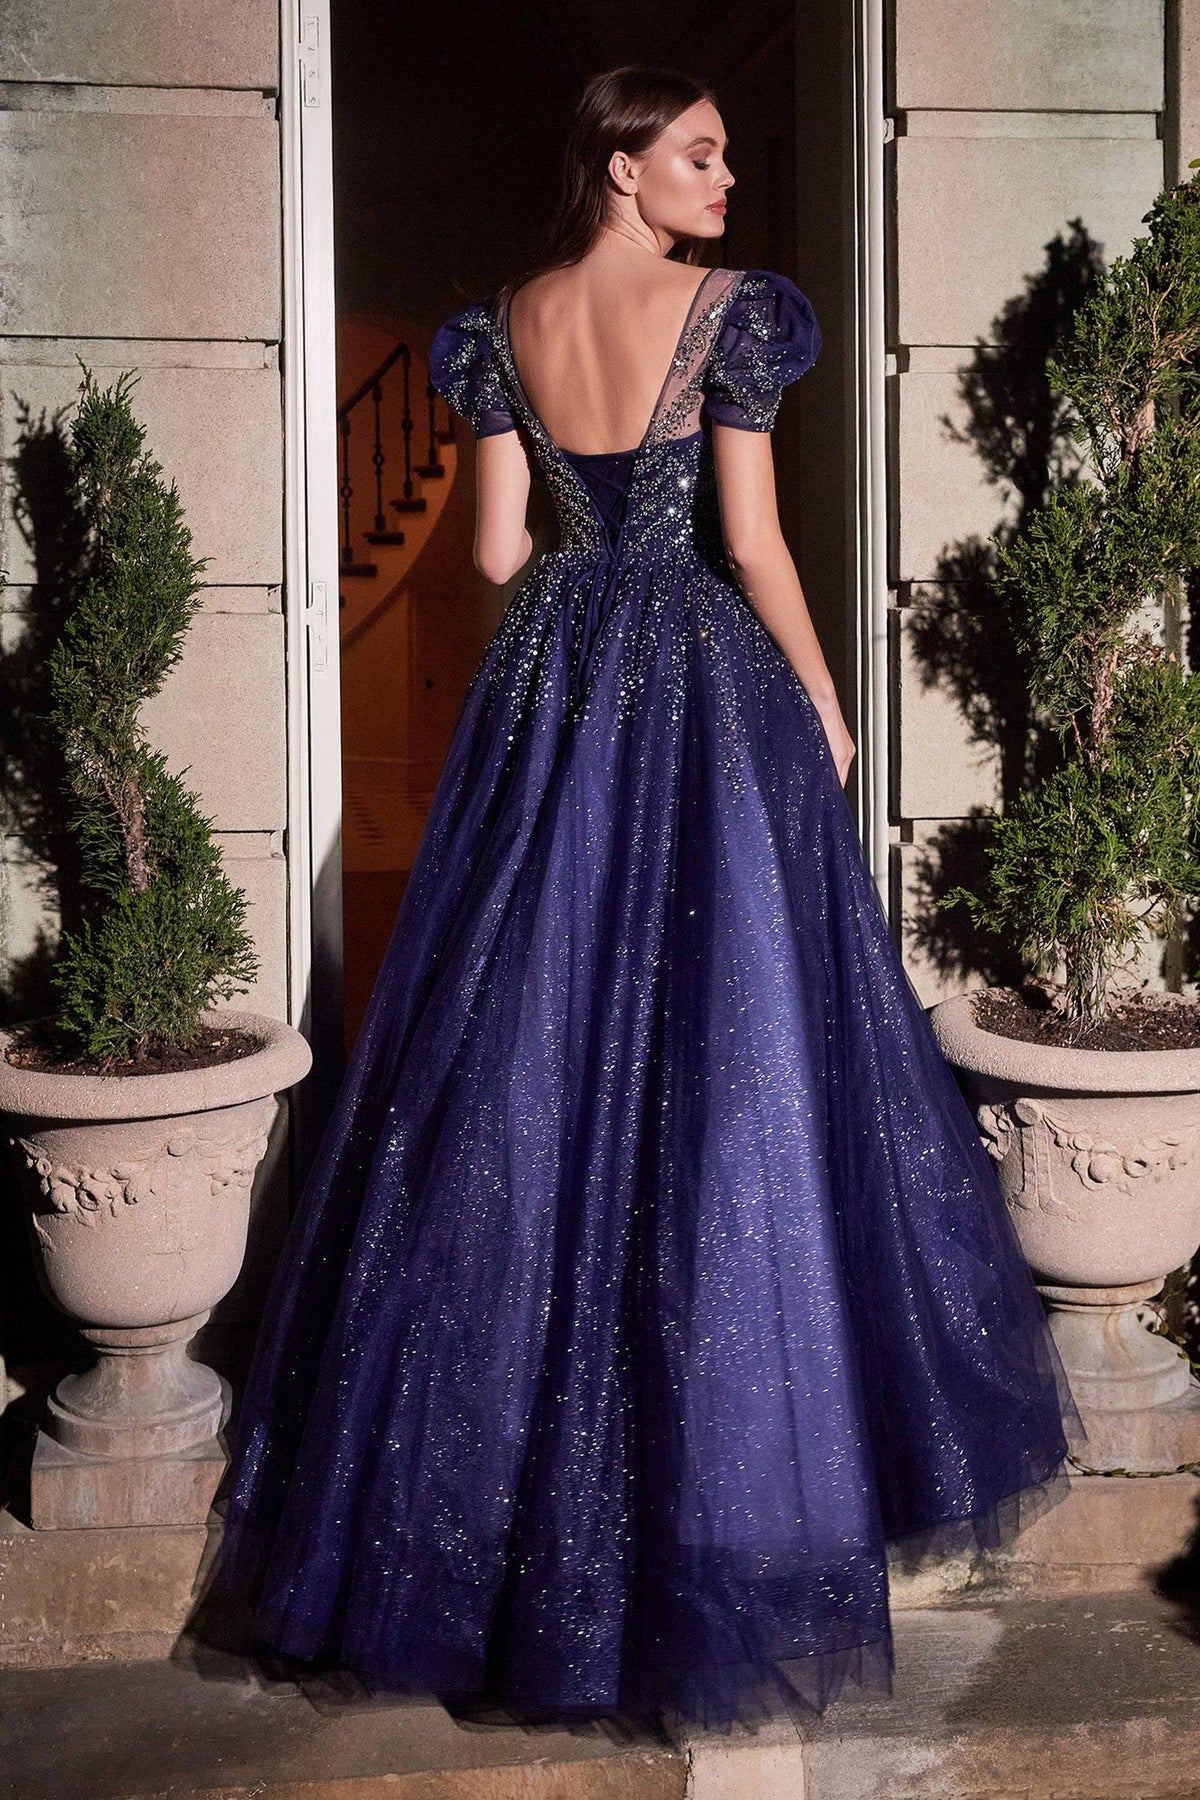 Princess-Like Ballgown with Beaded Accents and Large Layered Skirt #CDB702 - NORMA REED